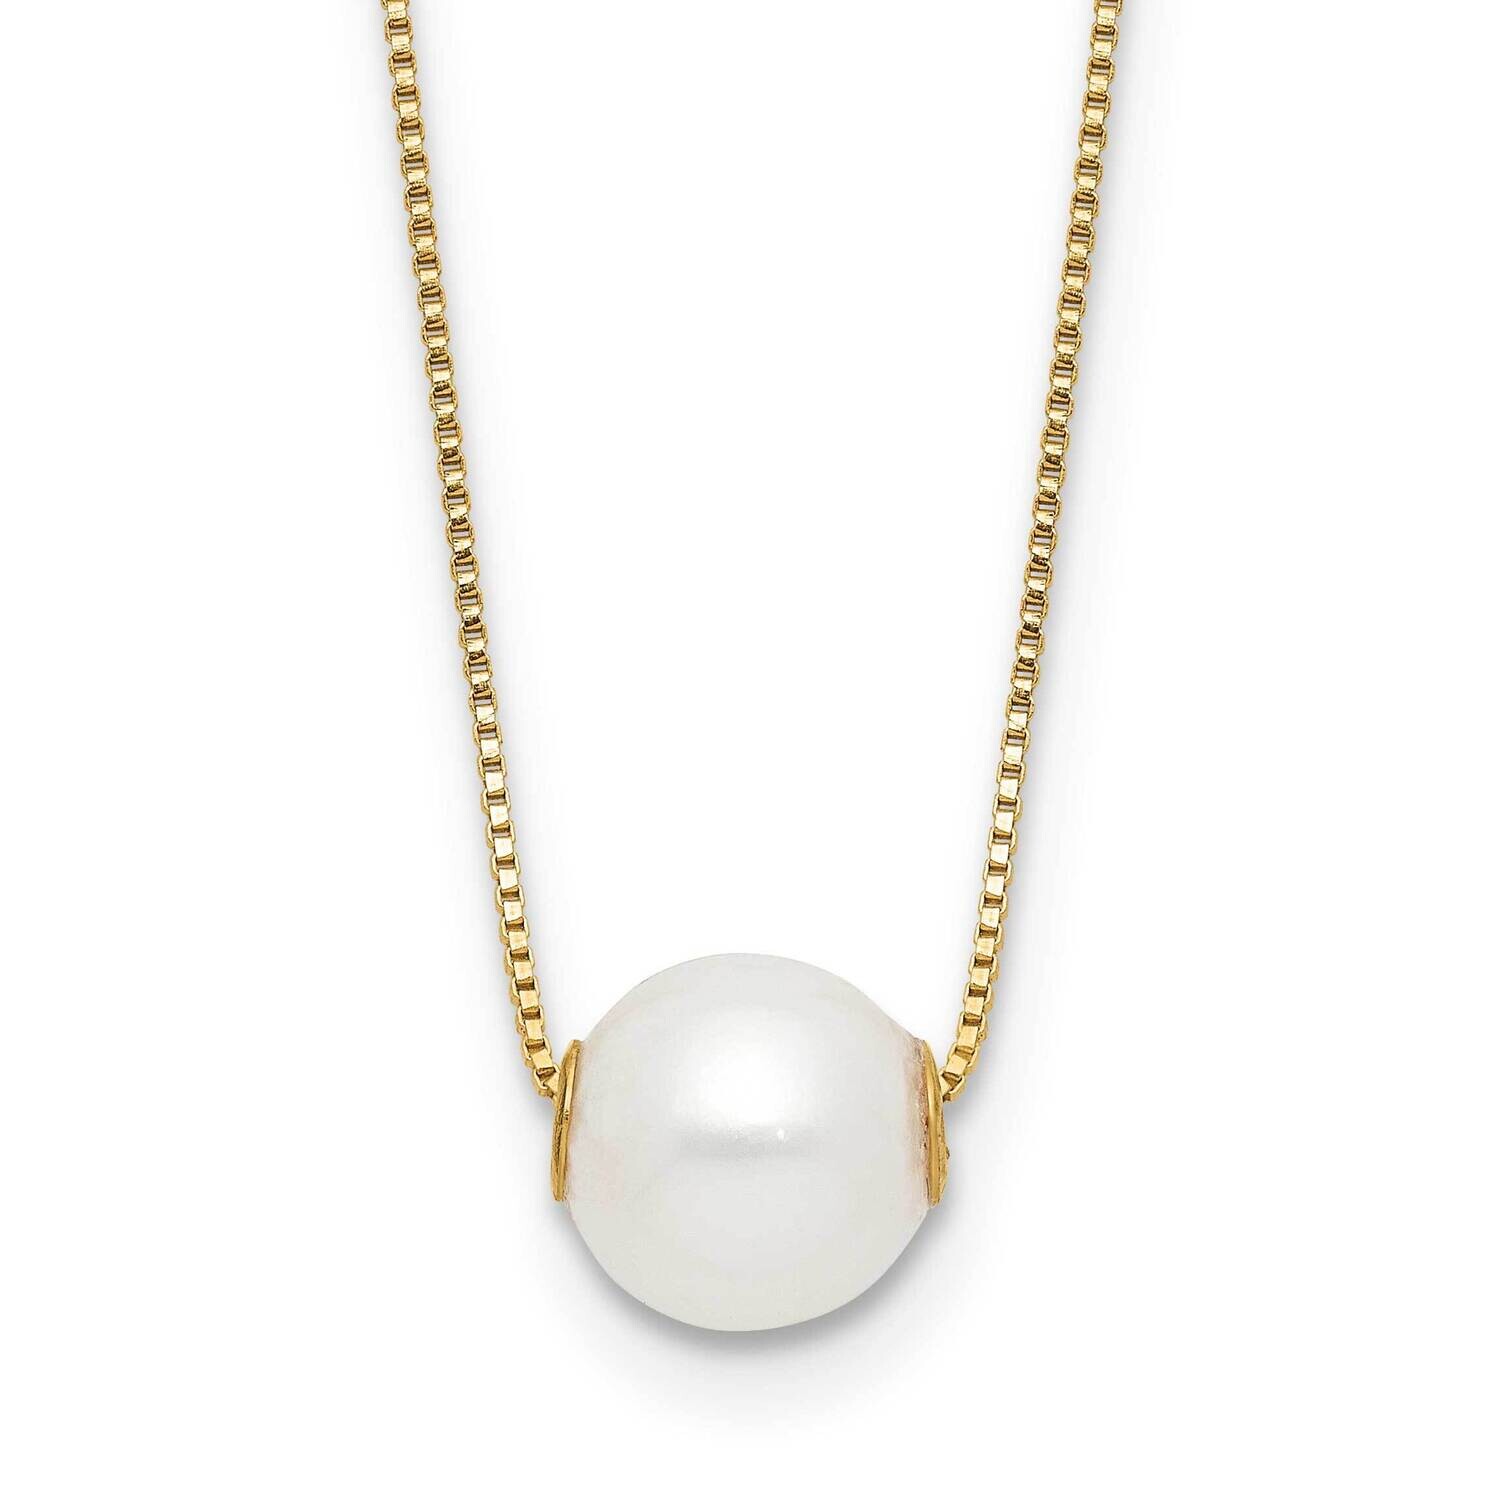 7-8mm Round White Freshwater Cultured Pearl 18 Inch Necklace 14k Gold XF822-18